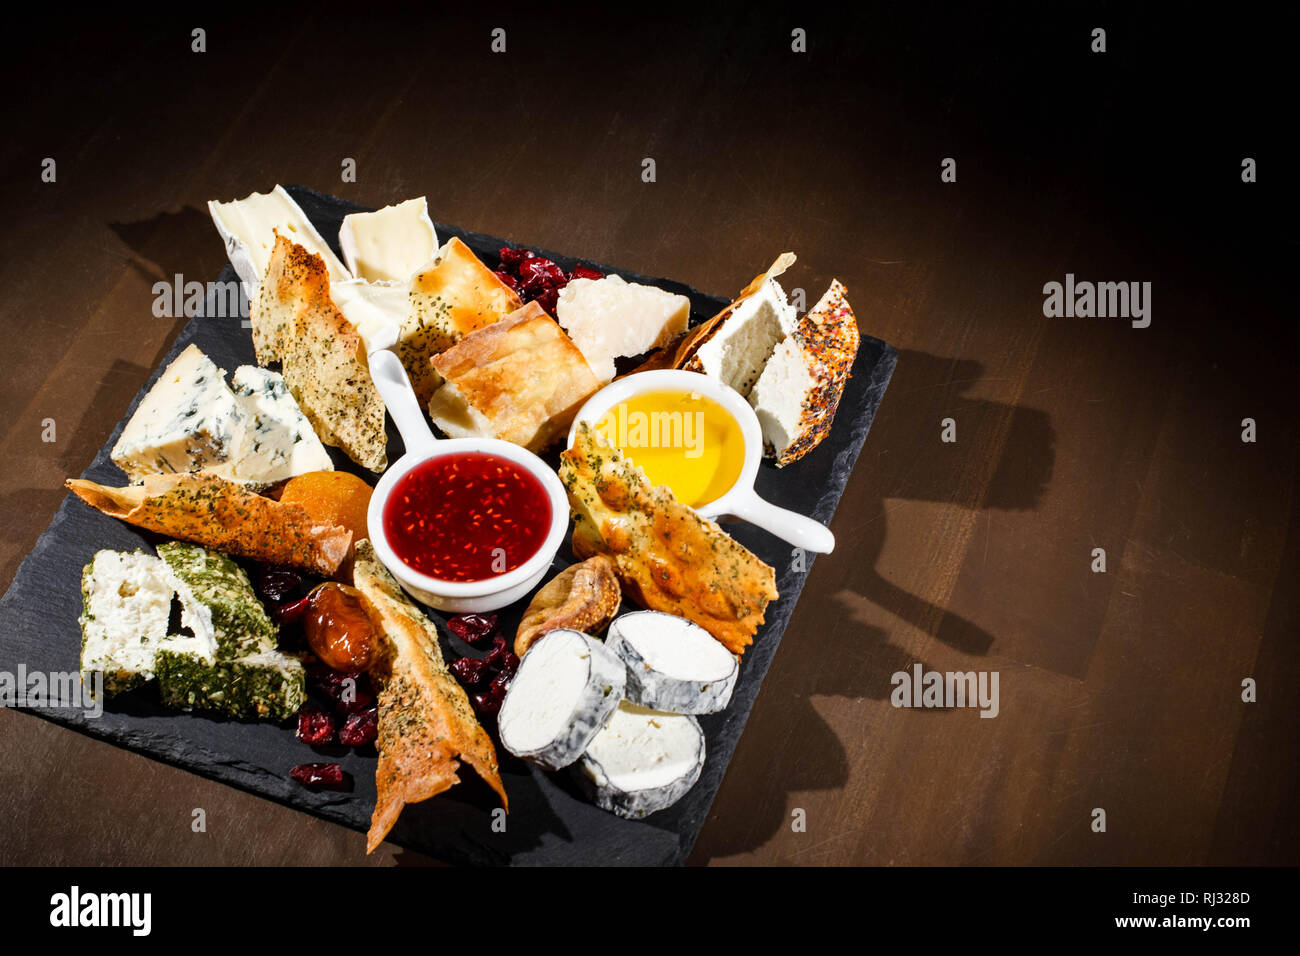 Pieces of camembert,  blue cheese, cheddar lie on black plate with sauces in white bowls Stock Photo